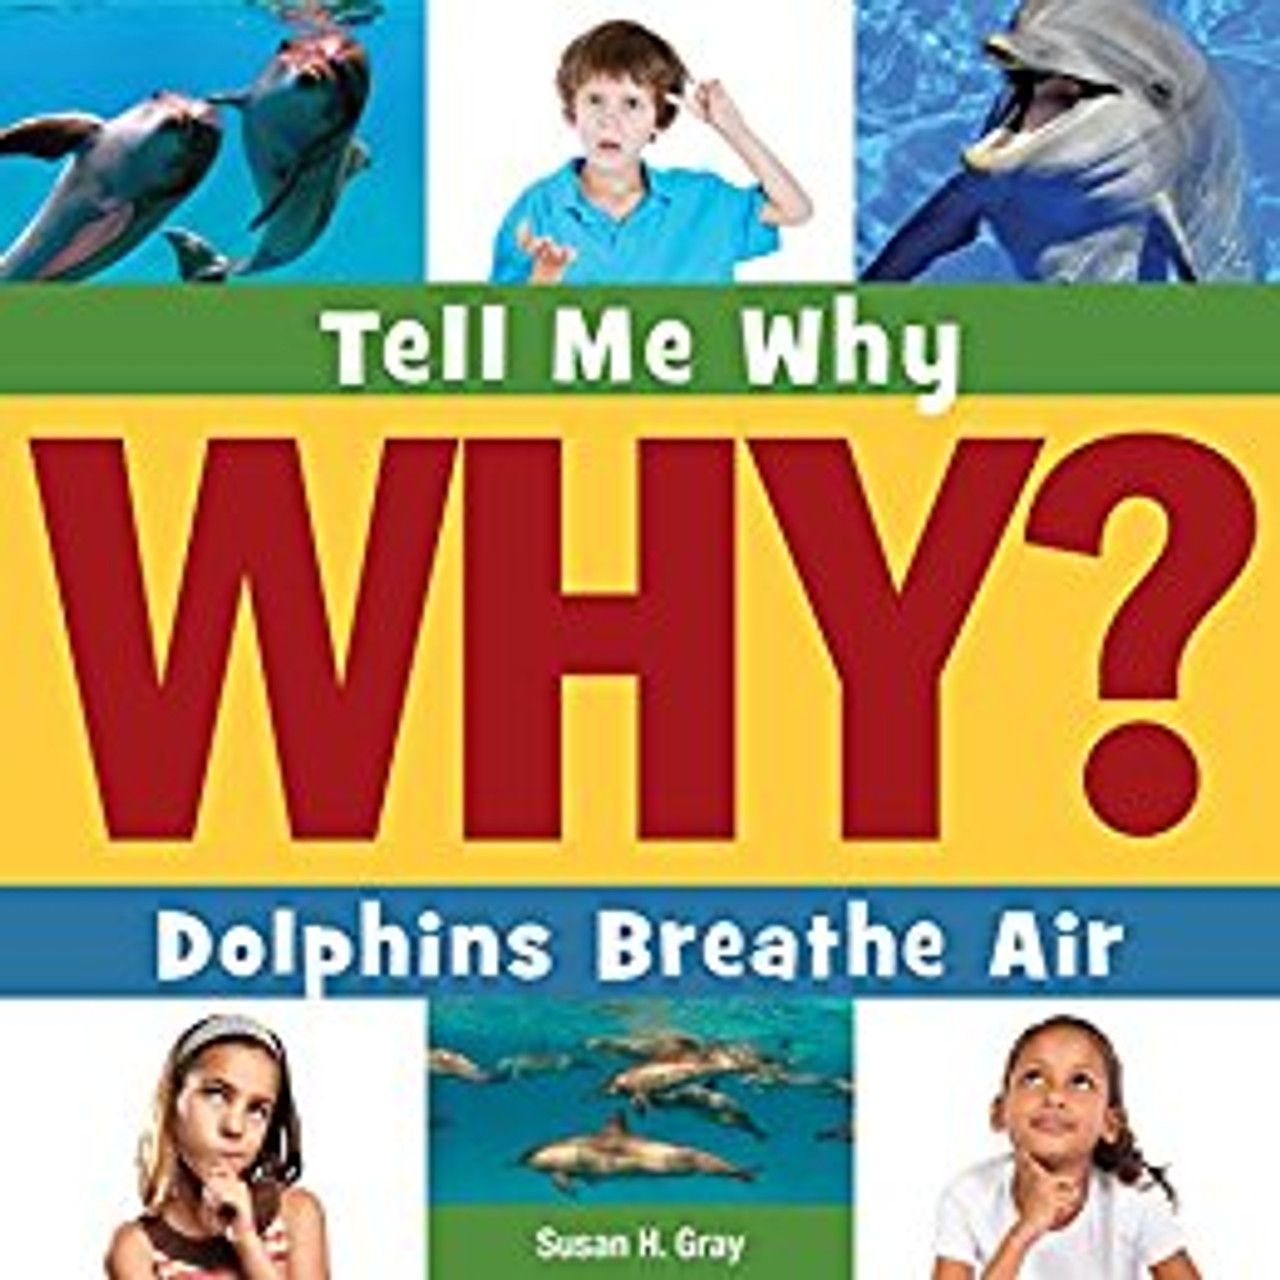 Dolphins Breathe Air by Susan H Gray